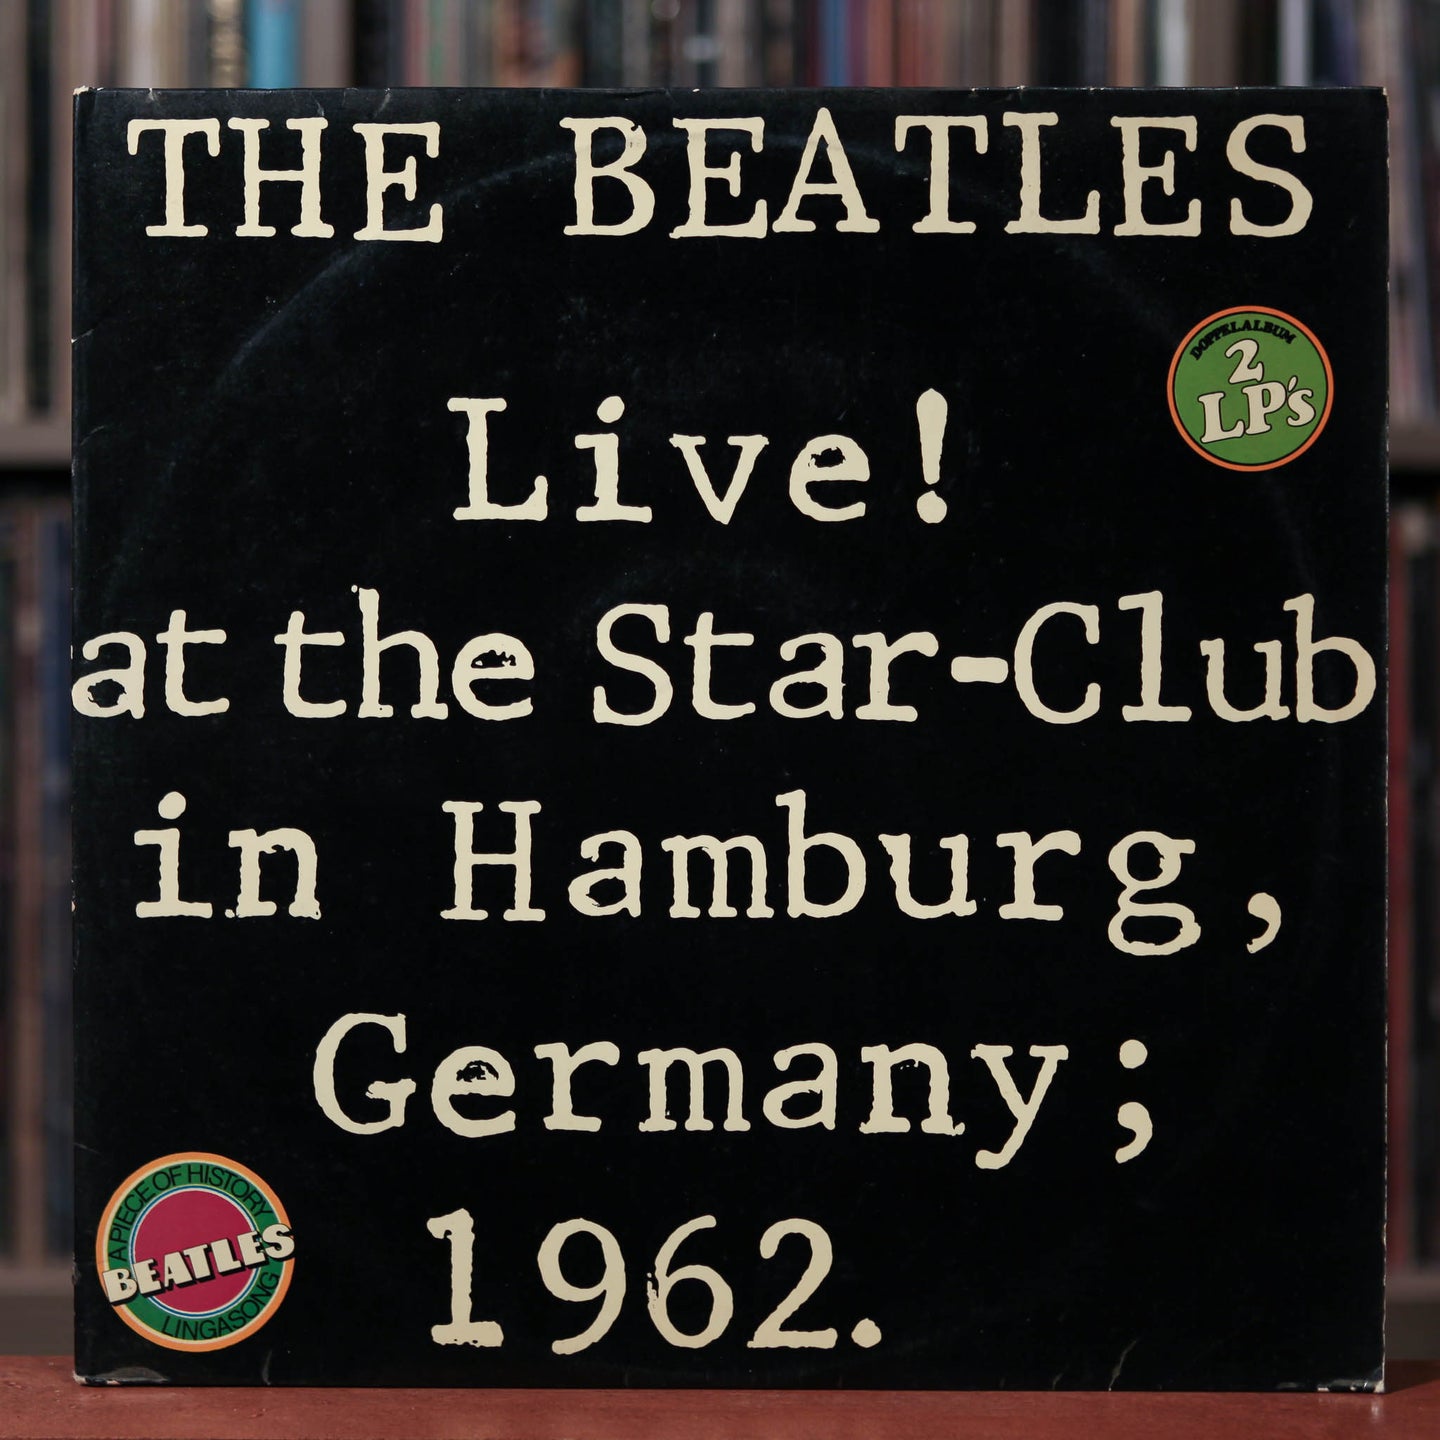 The Beatles - Live! At The Star-Club In Hamburg, Germany; 1962. - 2LP - German Import - 1977 Lingasong, VG/EX